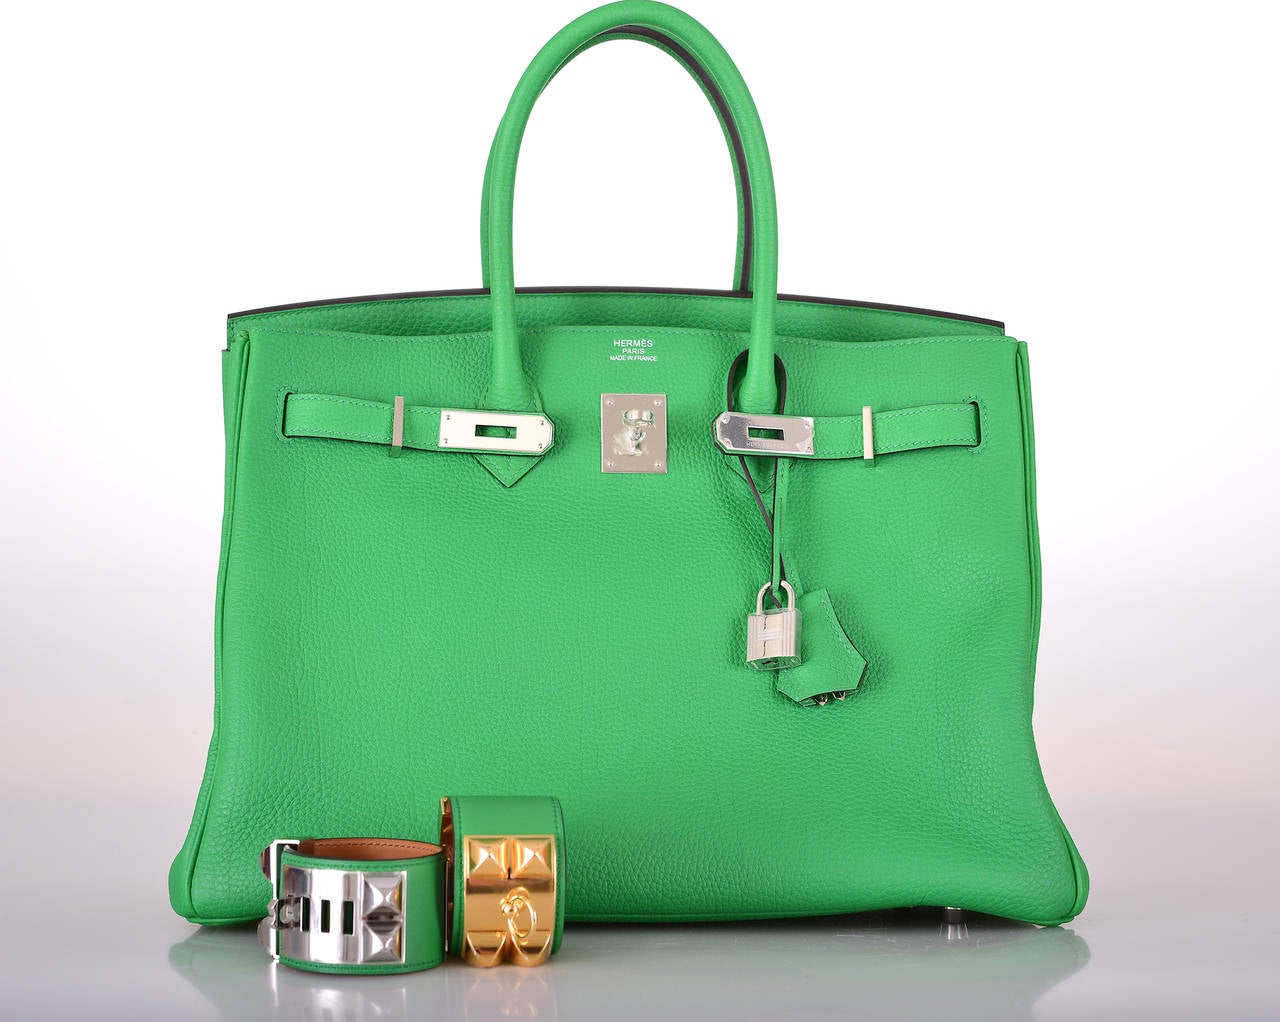 As always, another one of my fab finds! BAMBOU INSANE NEW GREEN Hermes BIRKIN BAG 35cm with PALLADIUM hardware and CLEMENCE leather.
THE COLOR IS REALLY SPECIAL.

This bag comes with lock, keys, clochette, a sleeper for the bag, rain protector,